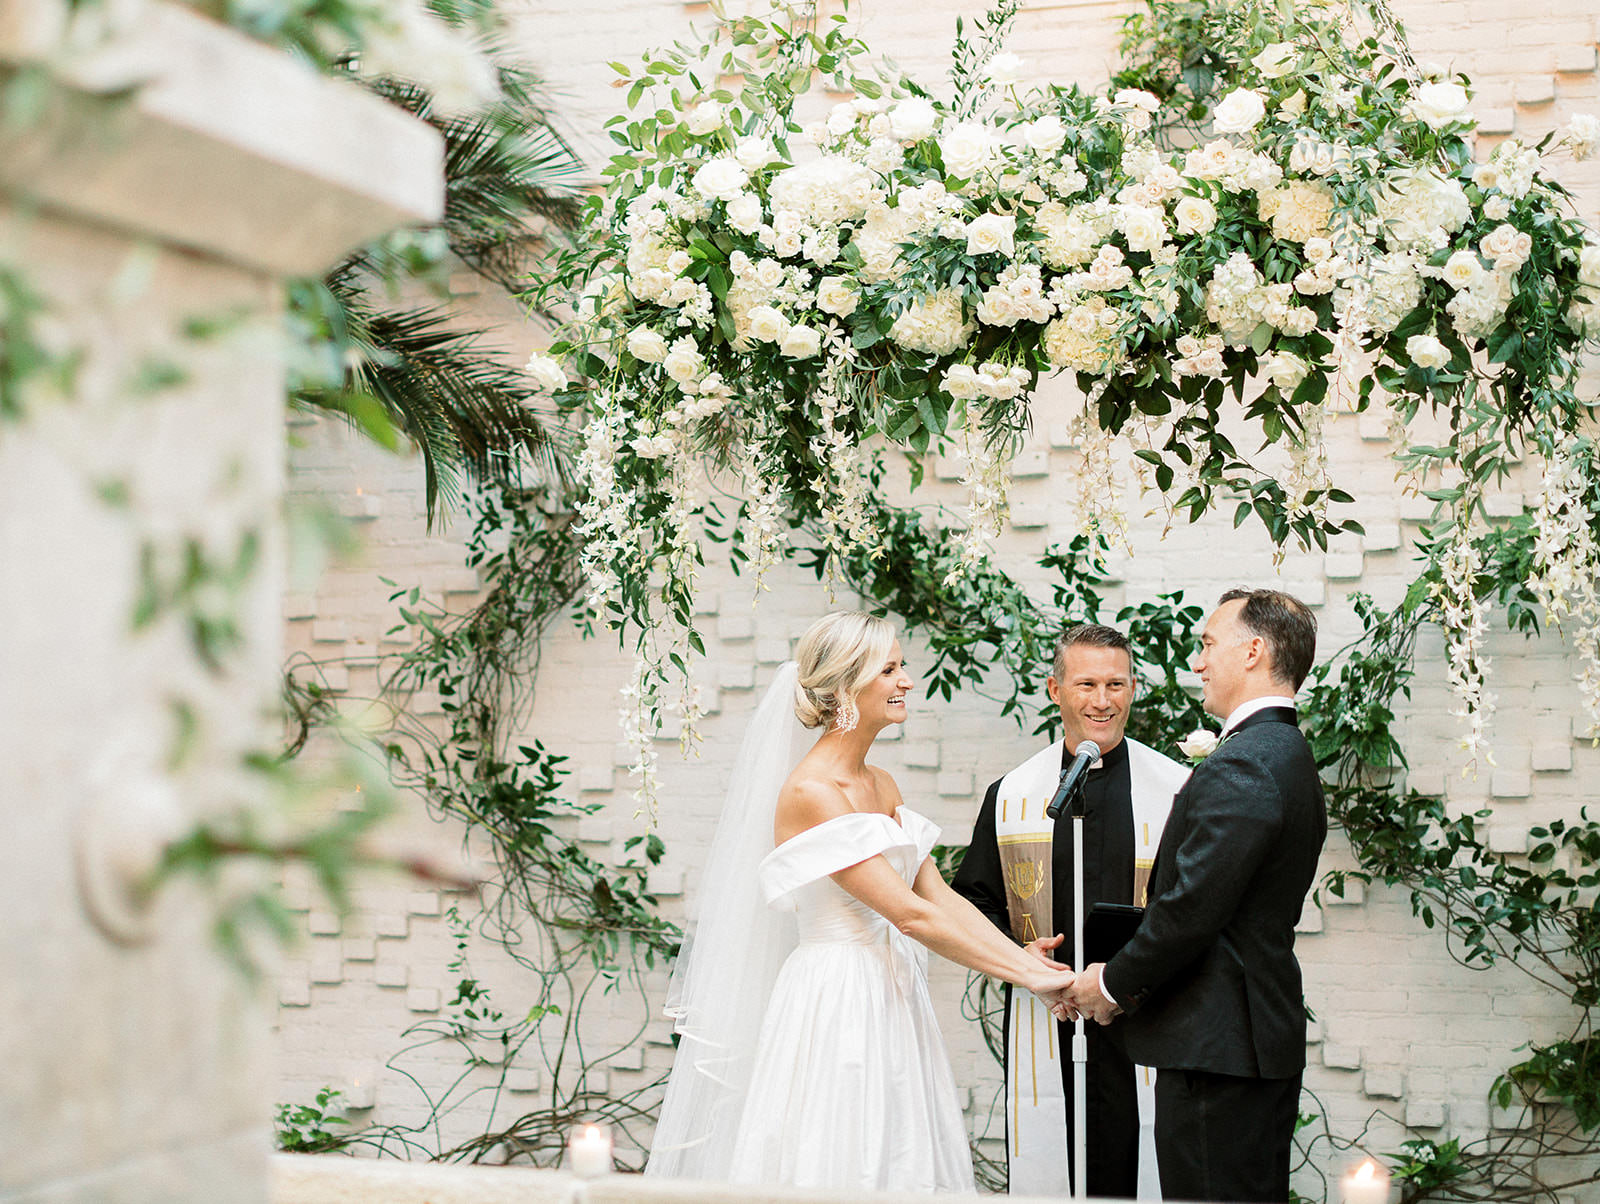 Classic Elegant Bride and Groom Exchanging Wedding Vows, Hanging Lush White Flowers with Greenery | Tampa Bay Wedding Florist Botanica | South Tampa Wedding Venue Oxford Exchange